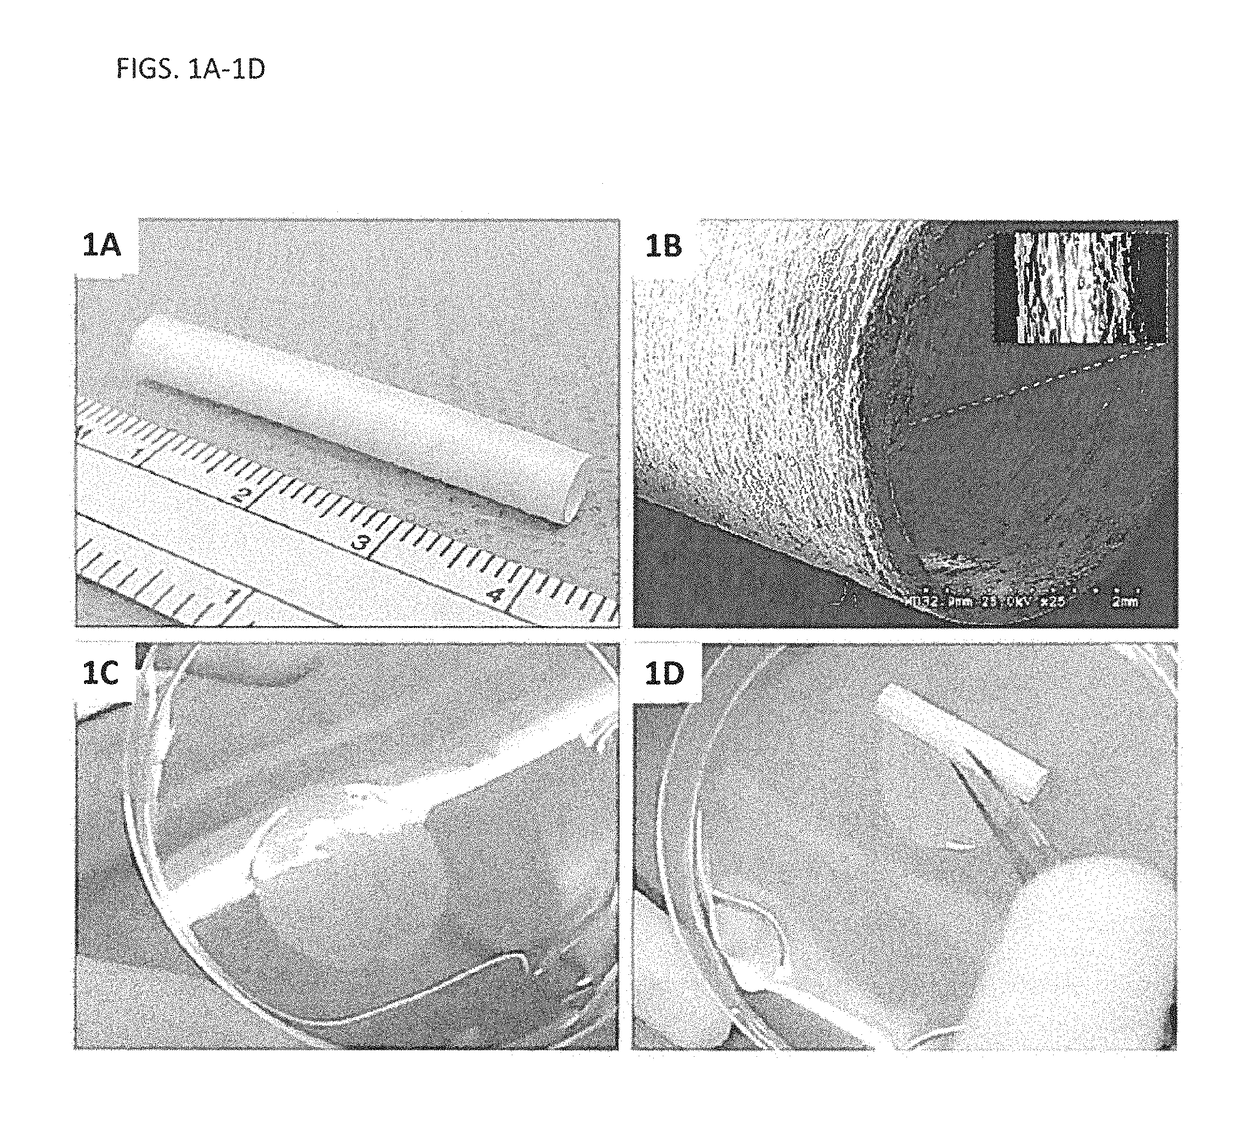 Laminous vascular constructs combining cell sheet engineering and electrospinning technologies